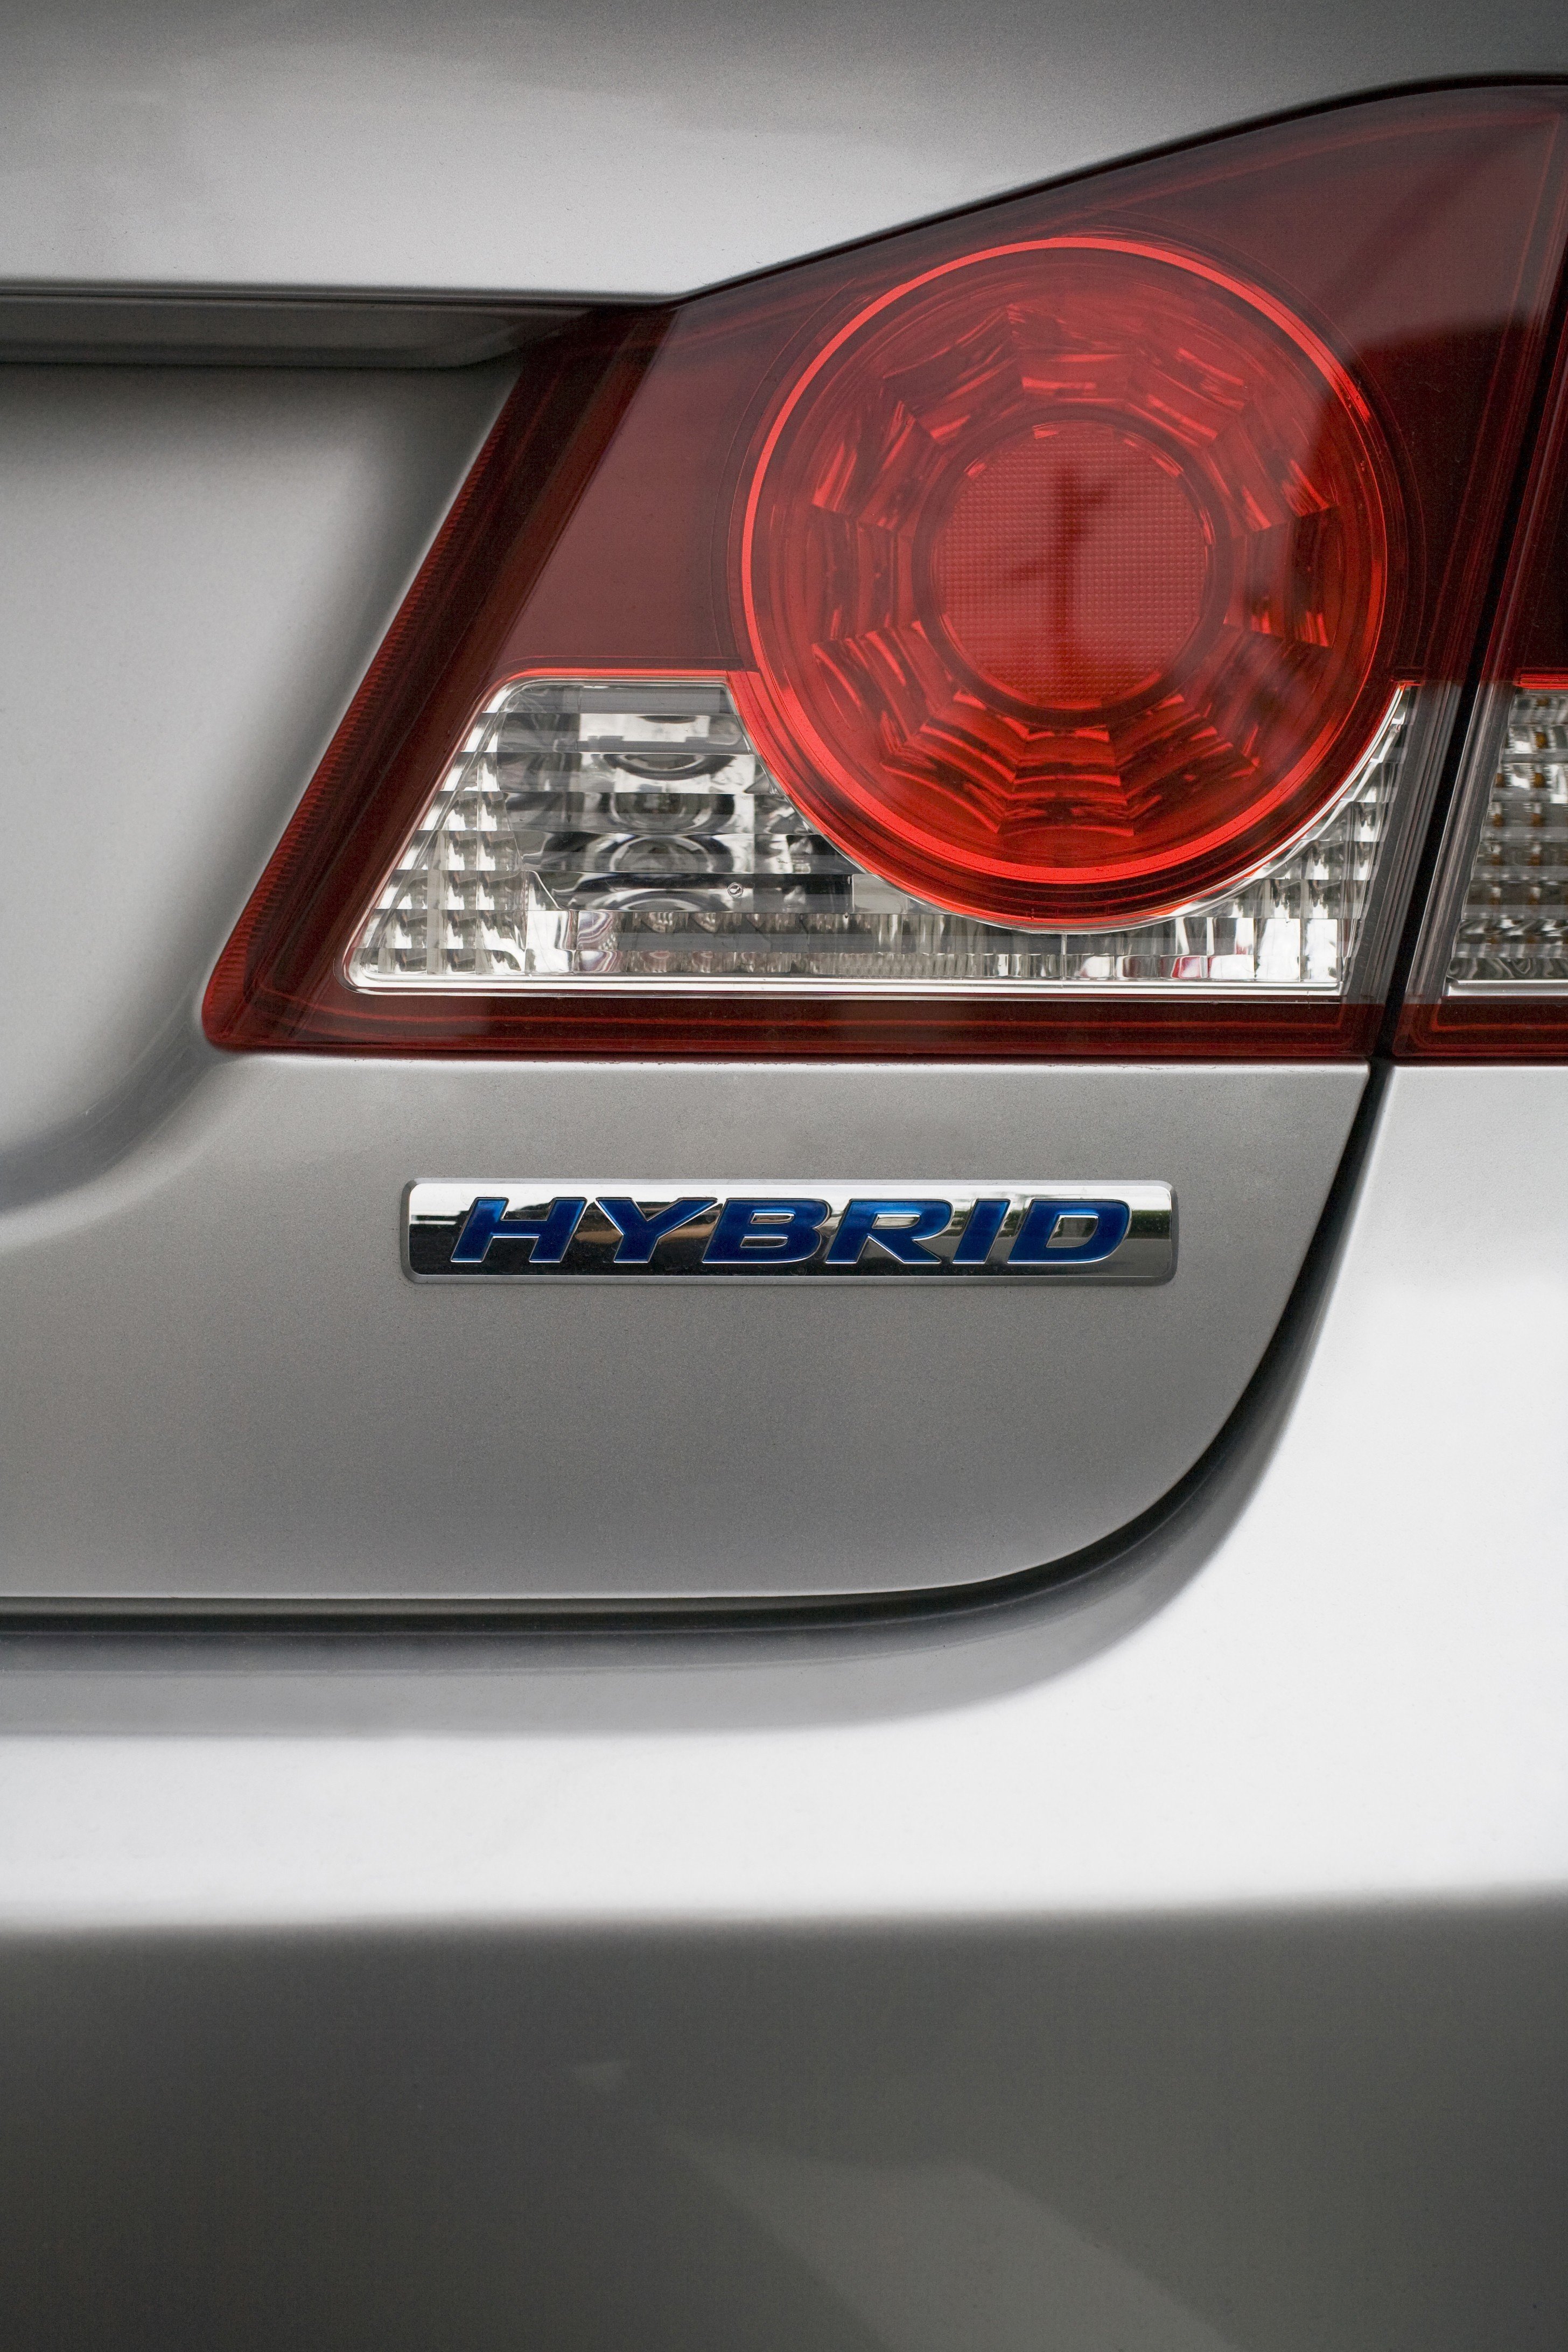 The Problem with Hybrid Cars That No One Is Talking About